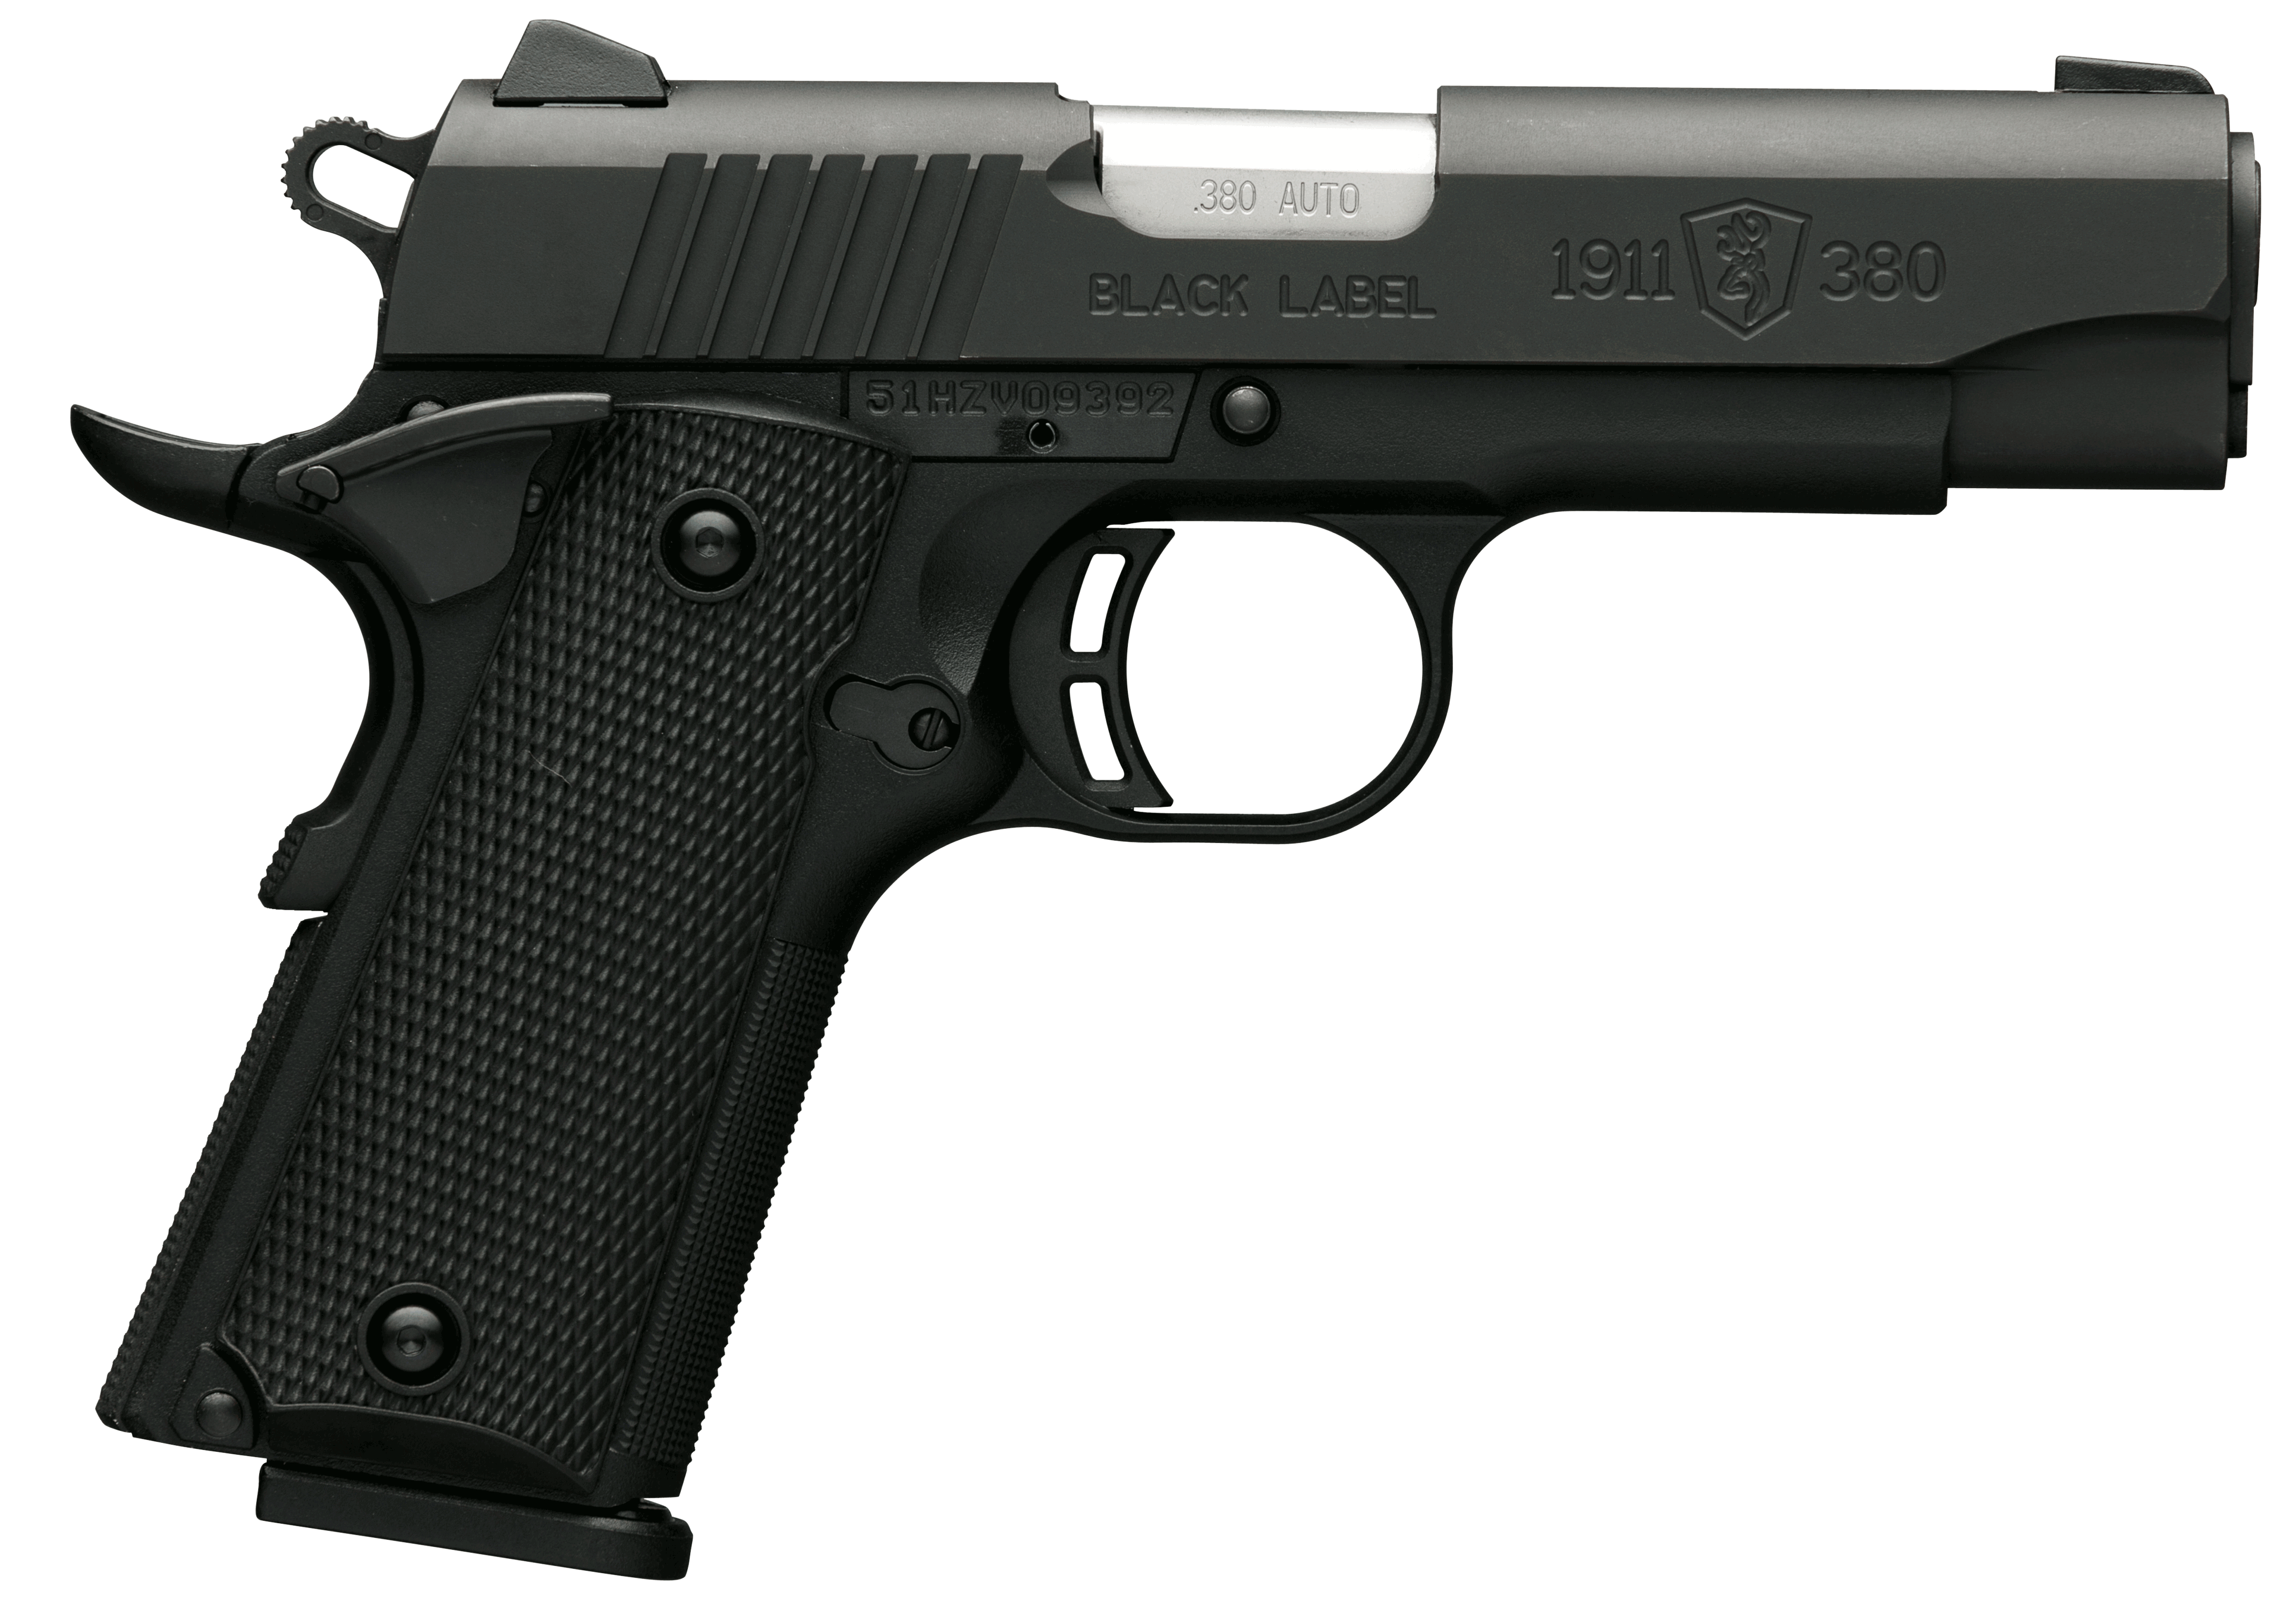 browning-051905492-1911-380-black-label-compact-380-acp-8-1-3-63